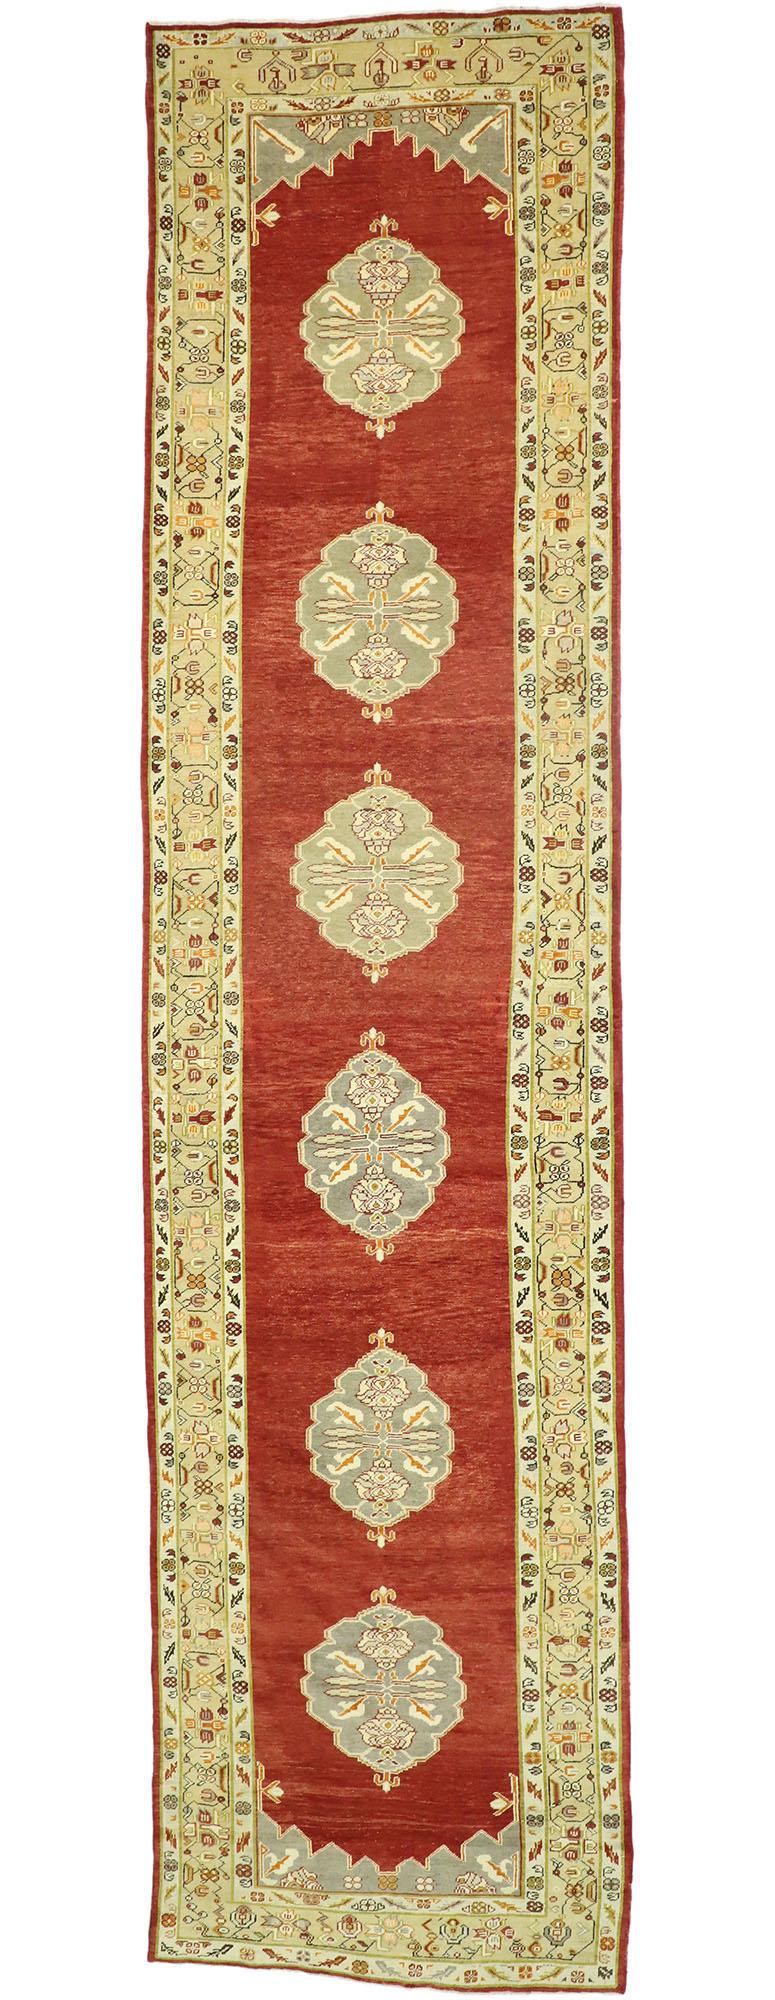 50601 Vintage Turkish Oushak Runner with Jacobean Style, Extra-Long Hallway Runner. This hand-knotted wool vintage Turkish Oushak runner features cusped medallions with ram's horn at either end  floating in an abrashed red backdrop. Each medallion